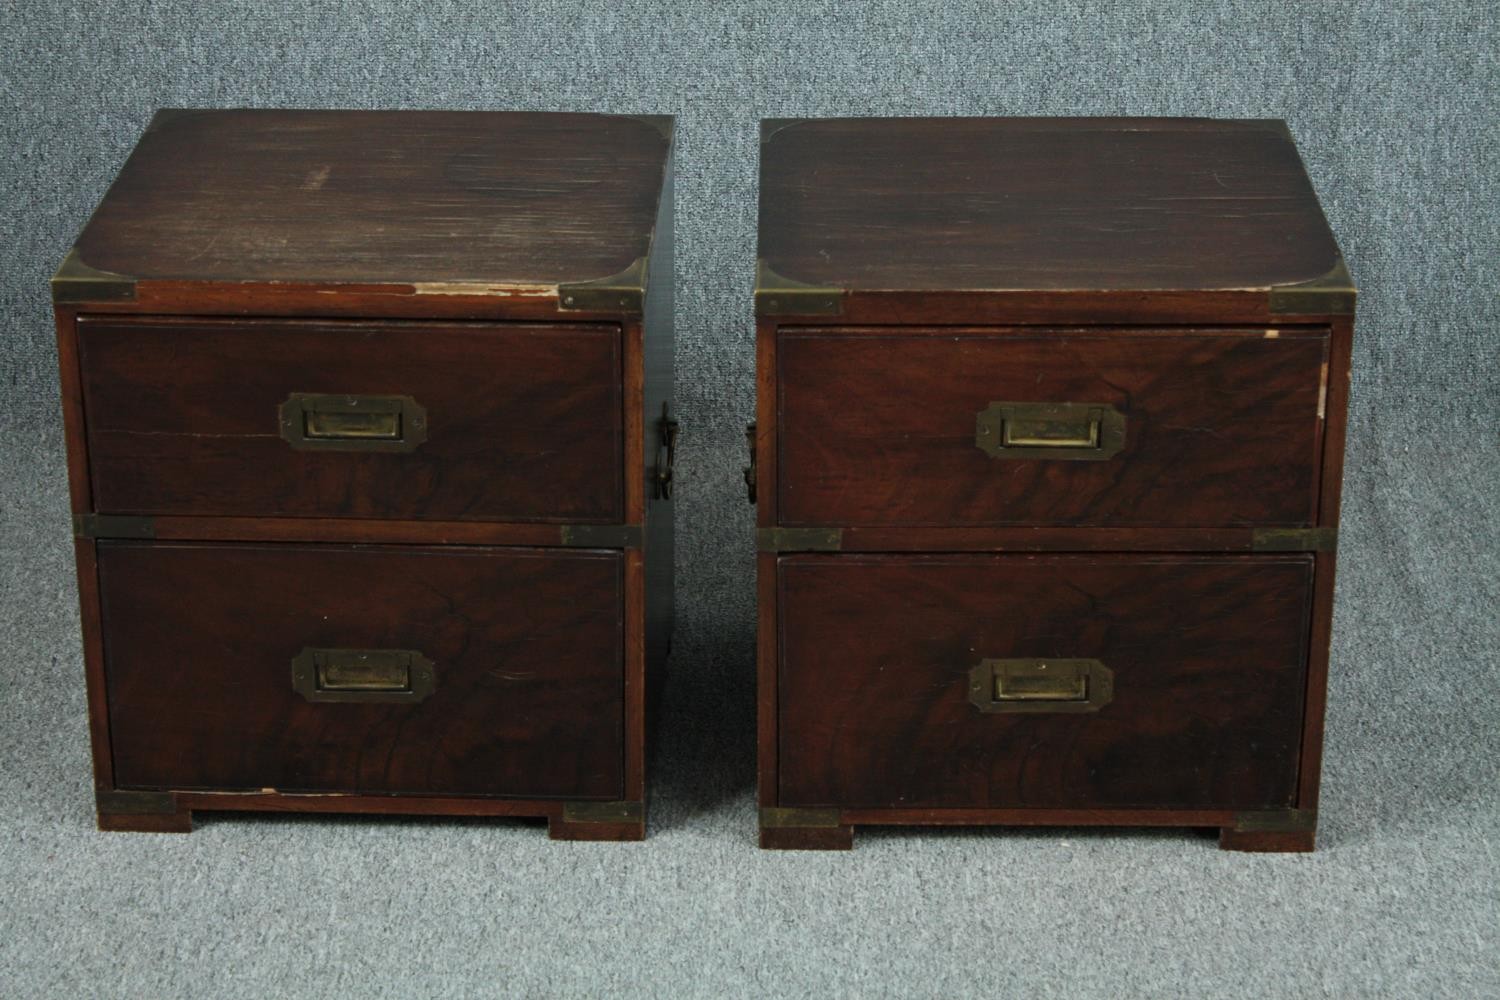 Bedside chests, a pair, Georgian mahogany military style. H.47 W.44 D.40cm. (each)